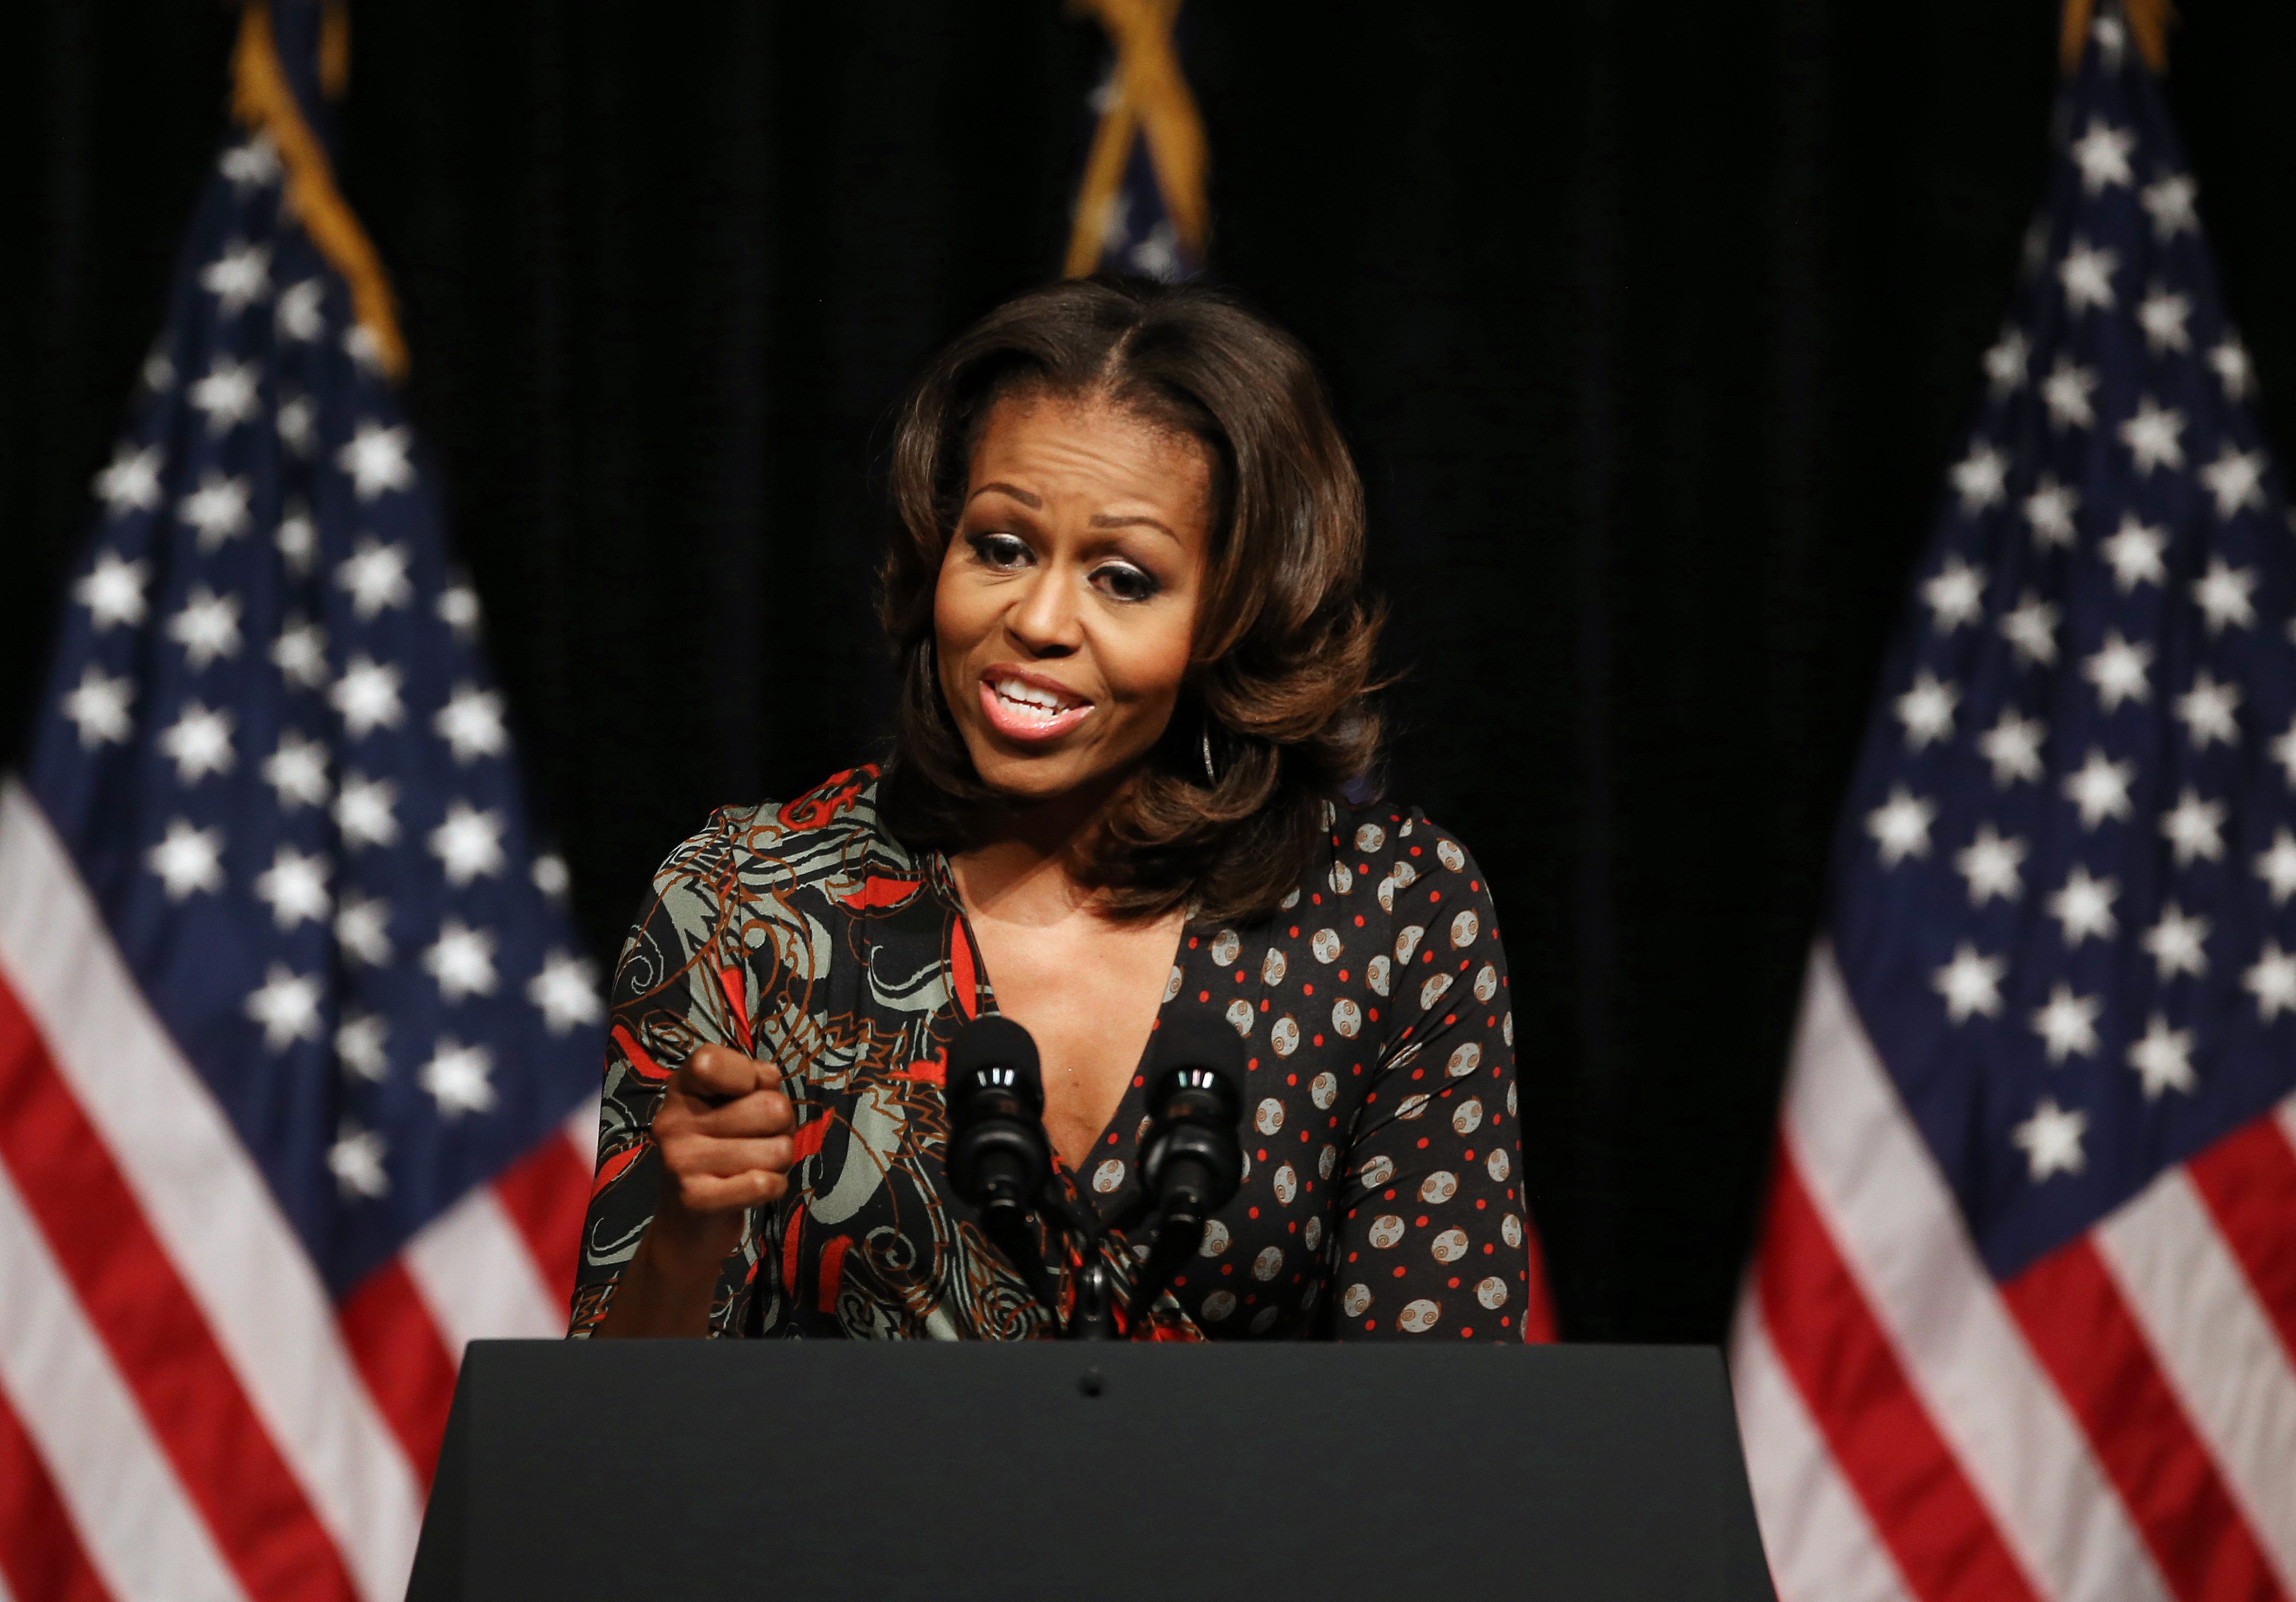 michelle-obama-speech-signals-new-administration-focus-on-boosting-low